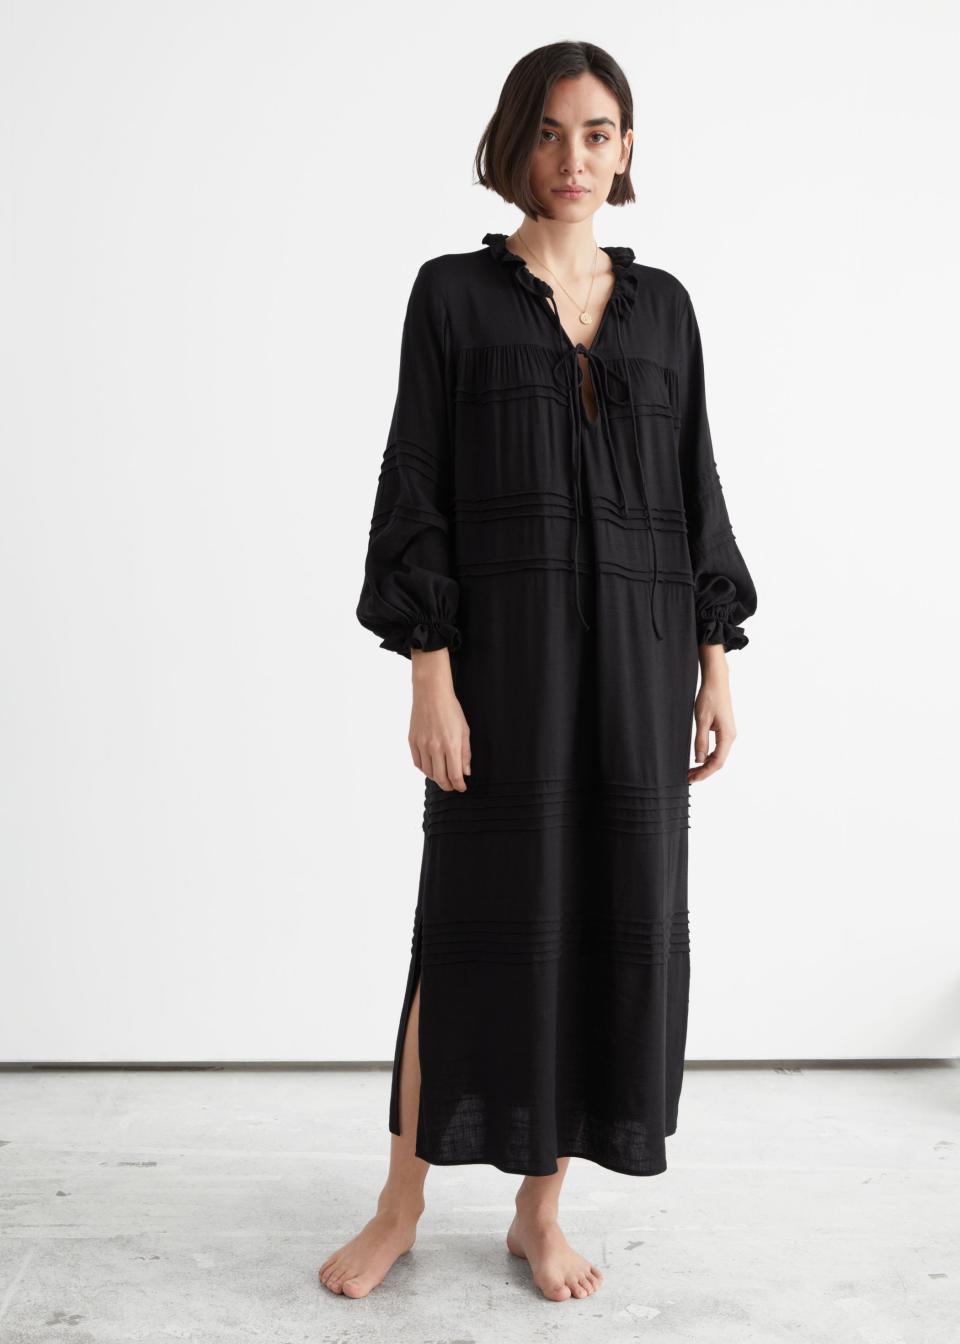 & Other Stories Oversized Ruffled Maxi Dress